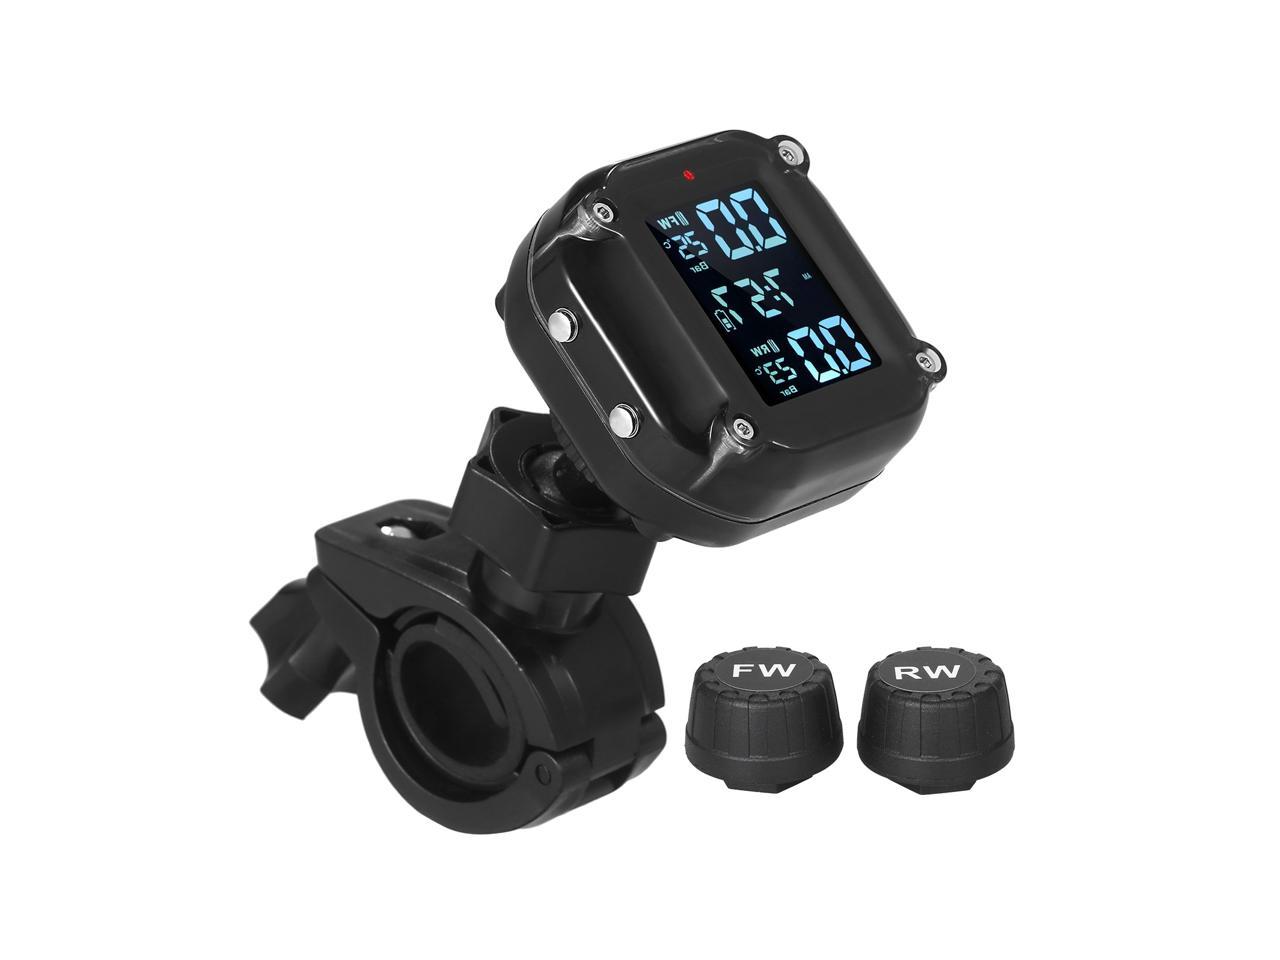 Details about   Waterproof Motorcycle Tire Pressure Monitoring System 7 Alarm Modes A3W2 